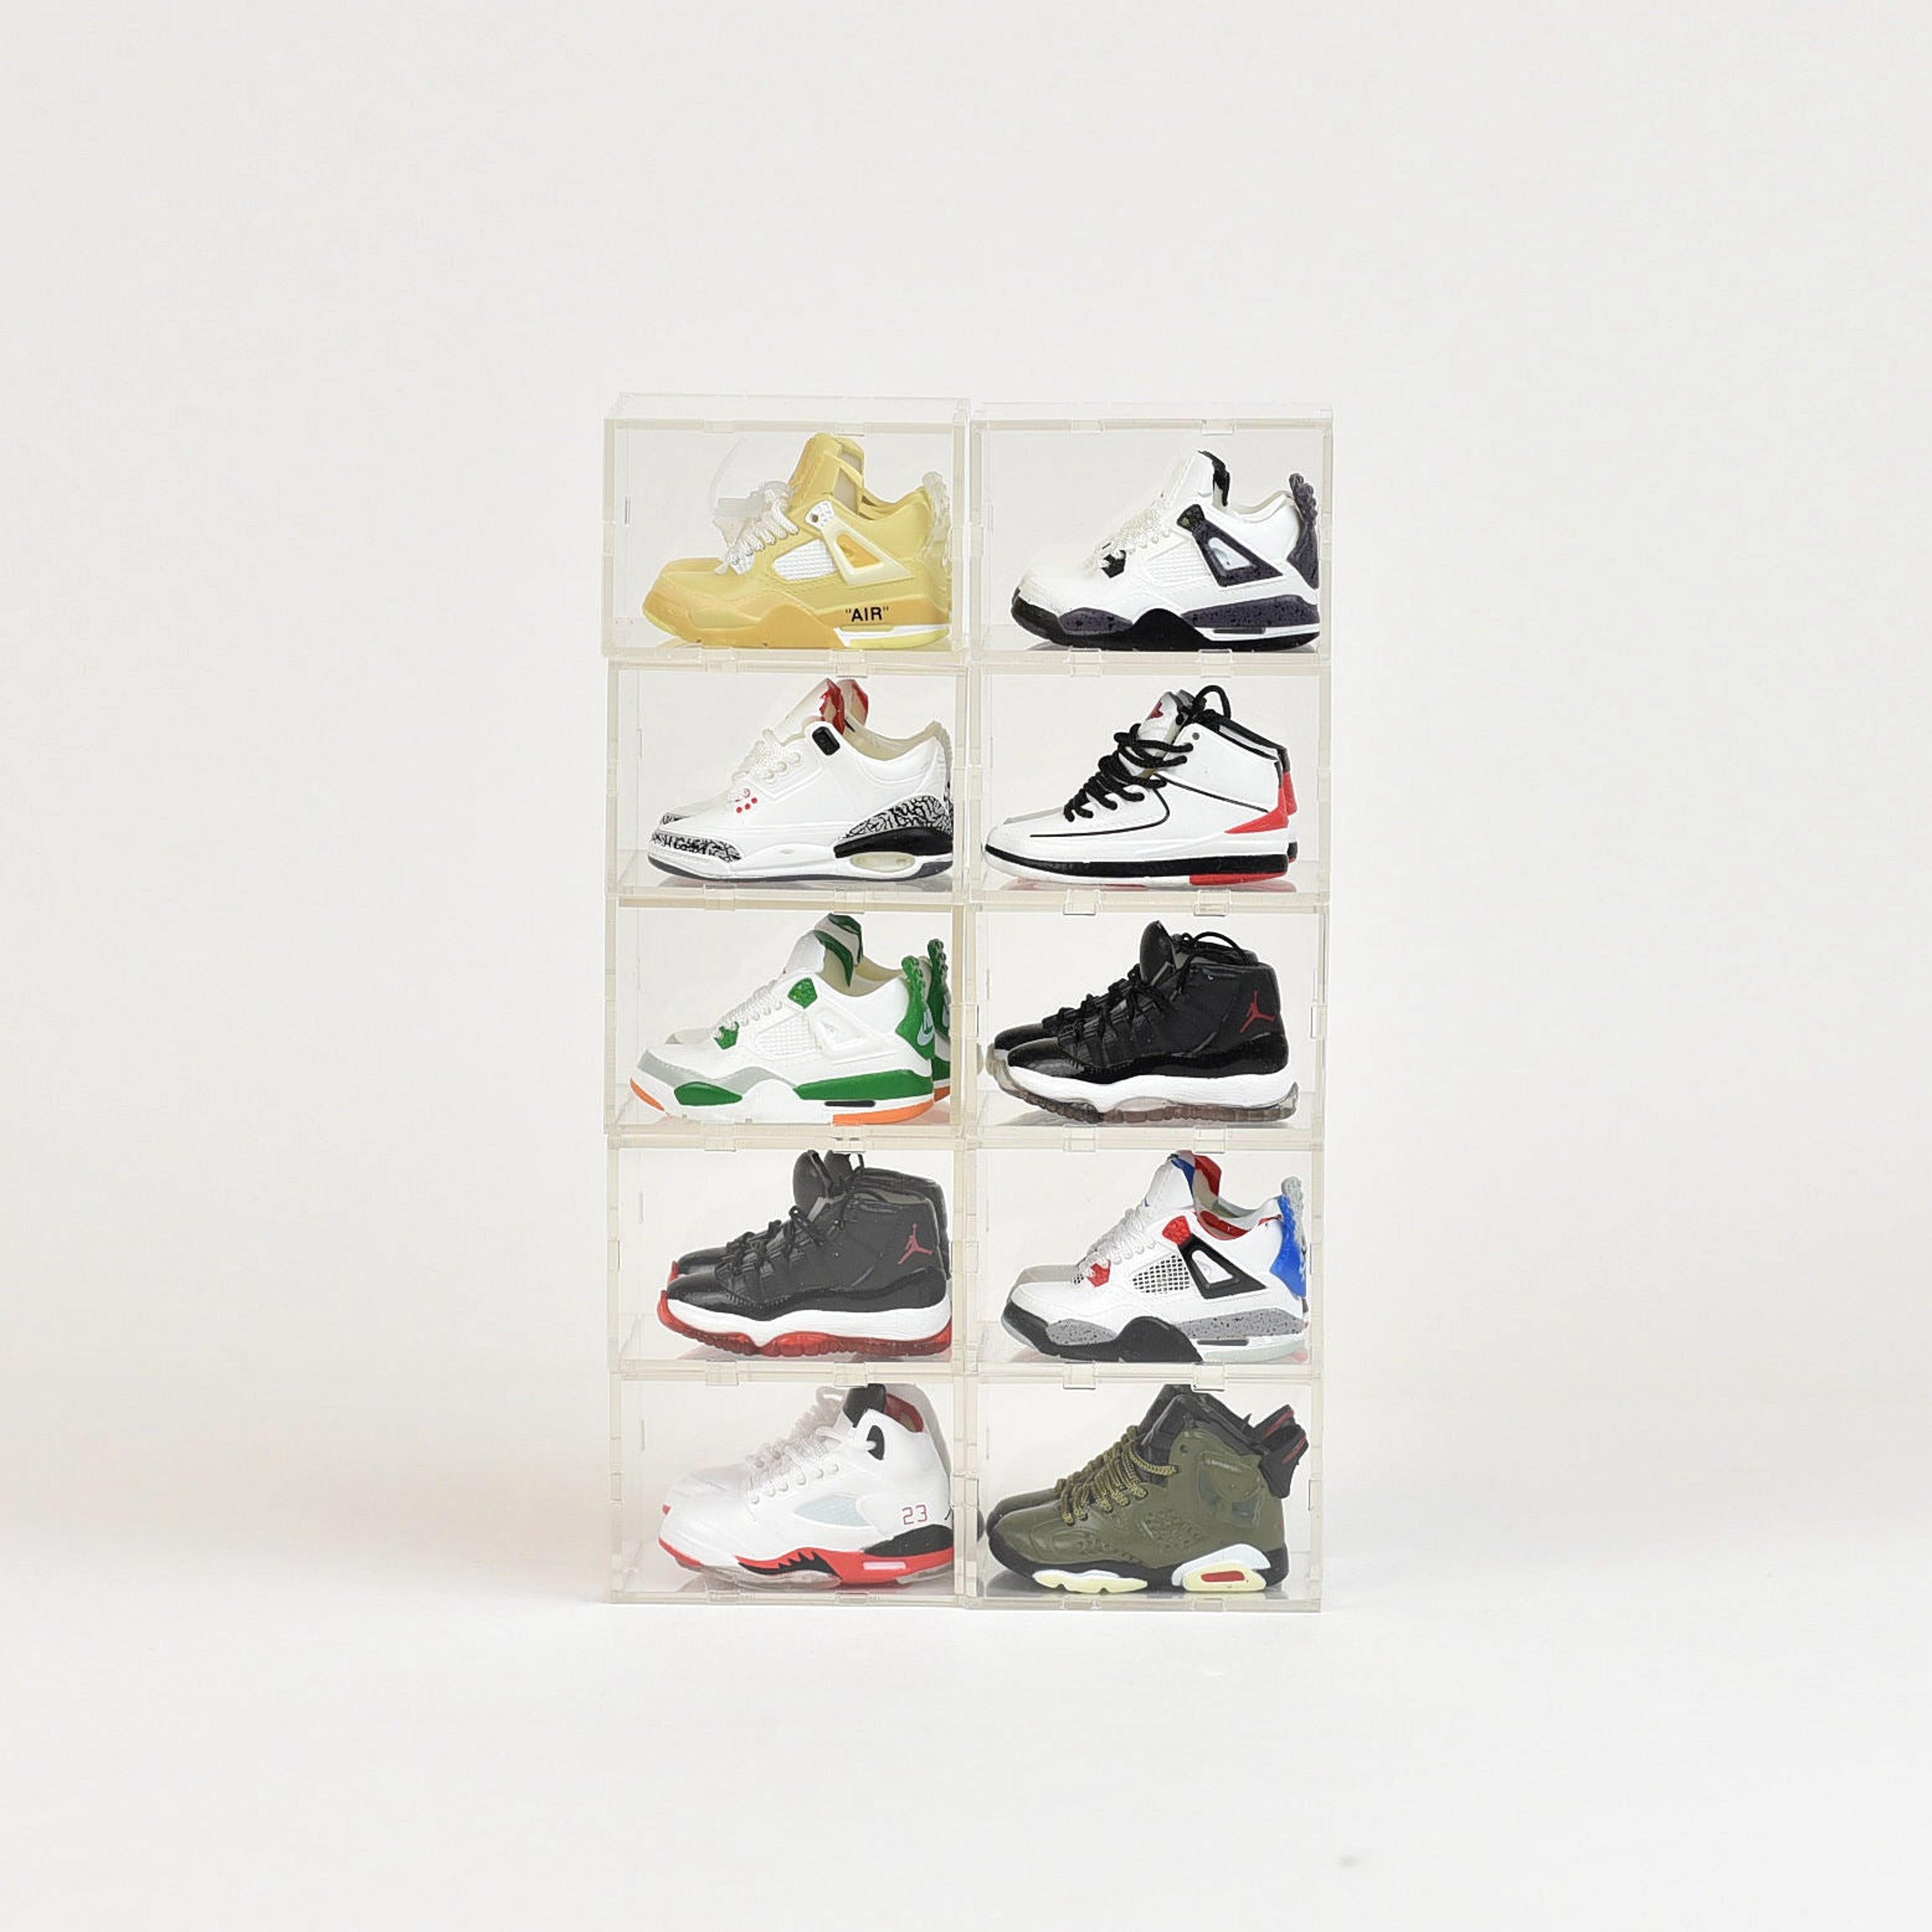 Alternate View 46 of AJ2-AJ13 Mini Sneakers Collection with Display Case